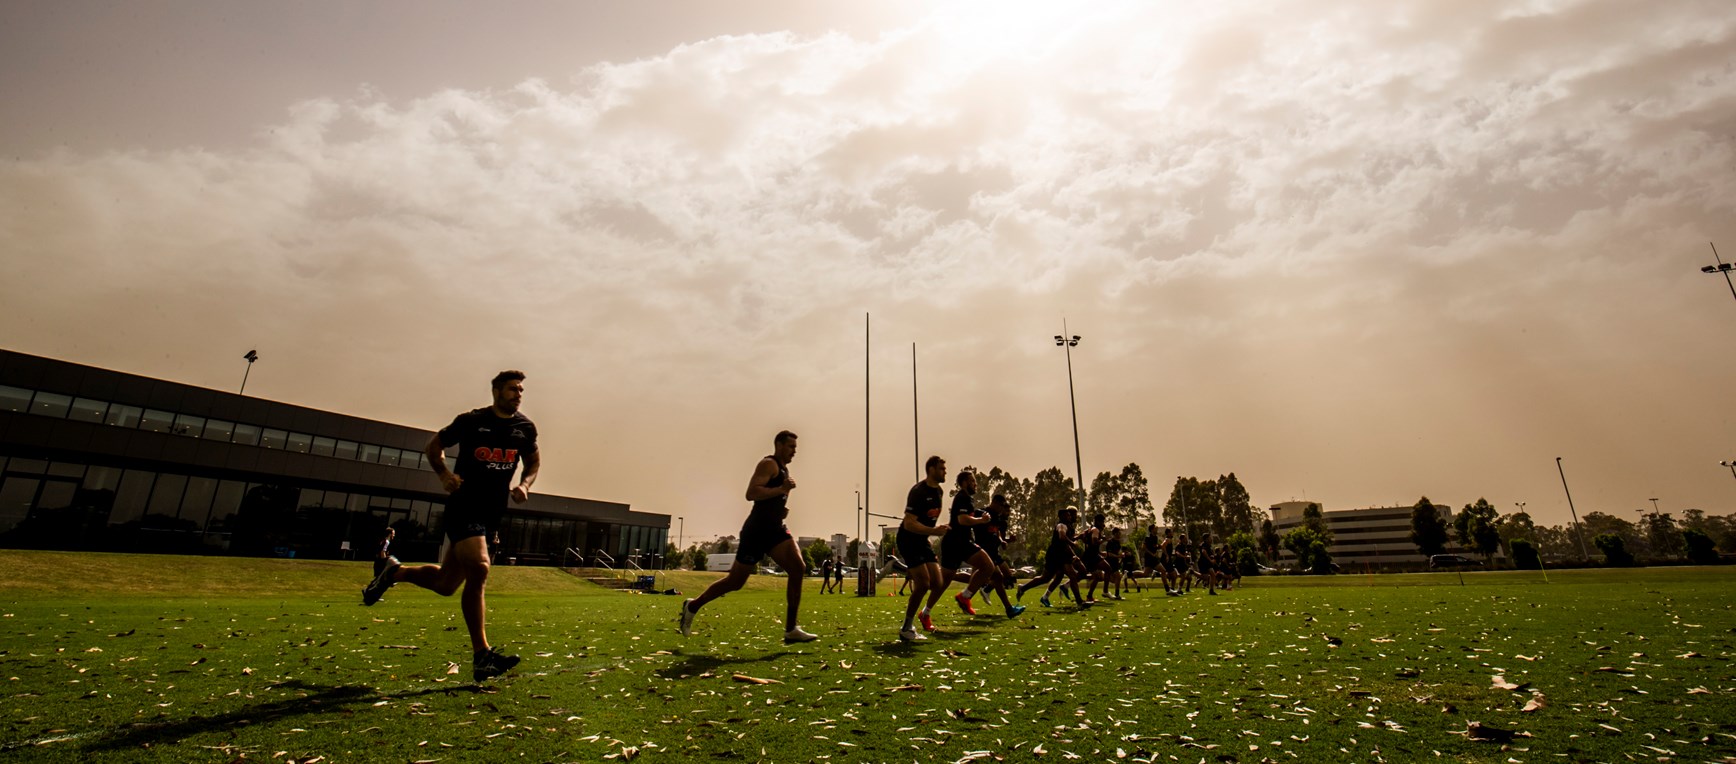 Gallery: Training in the Dust Storm